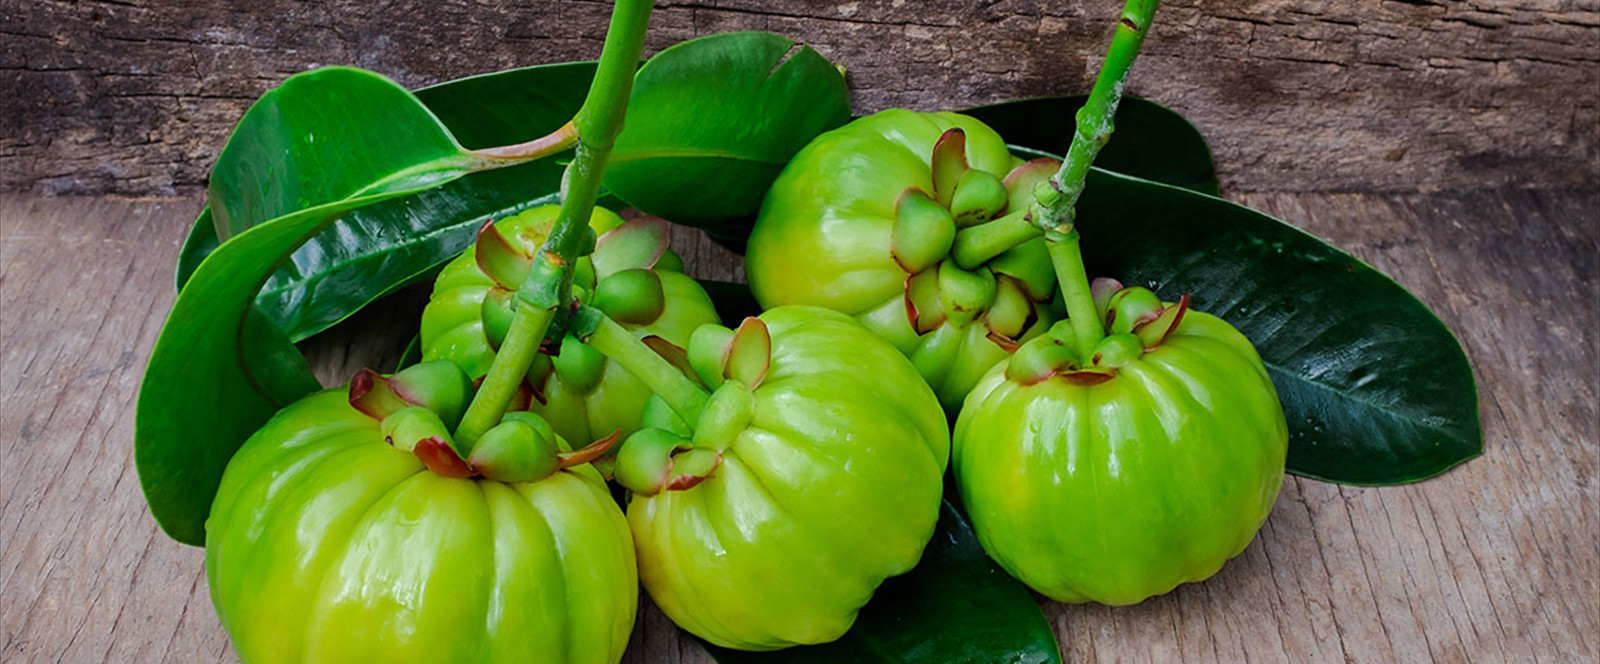 Garcinia Cambogia Extract is One of Our featured product